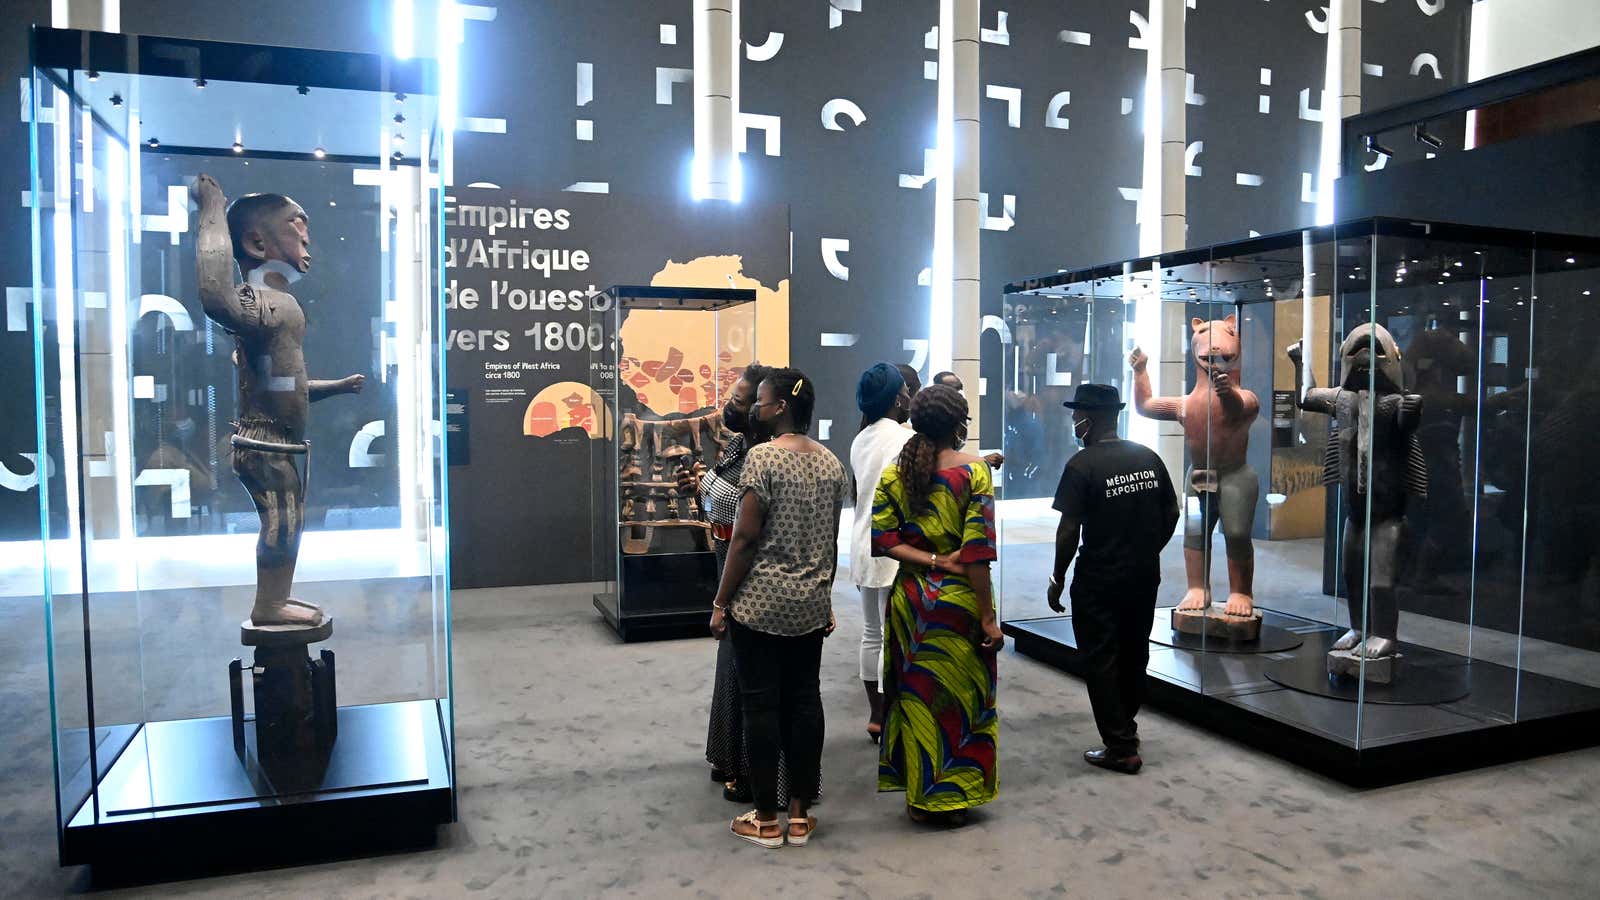 Art provided a connection to history in Benin